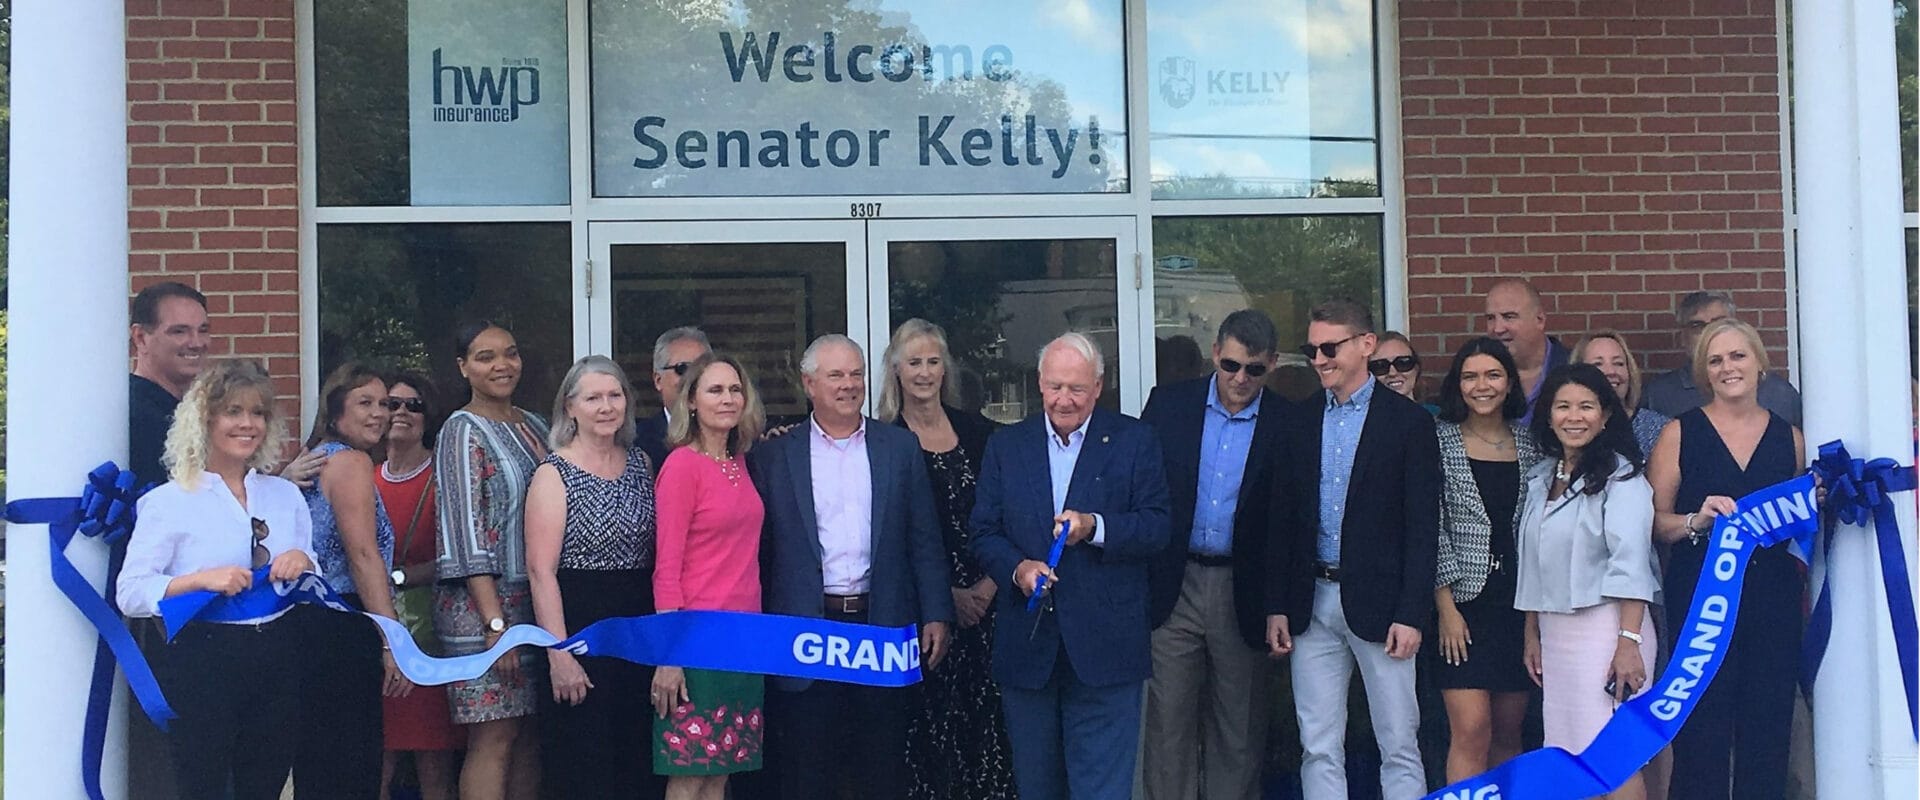 A mix of staff and local community member pictured in front of the Hughesville Office. Senator Kelly is pictured in the center cutting the grand opening ribbon.